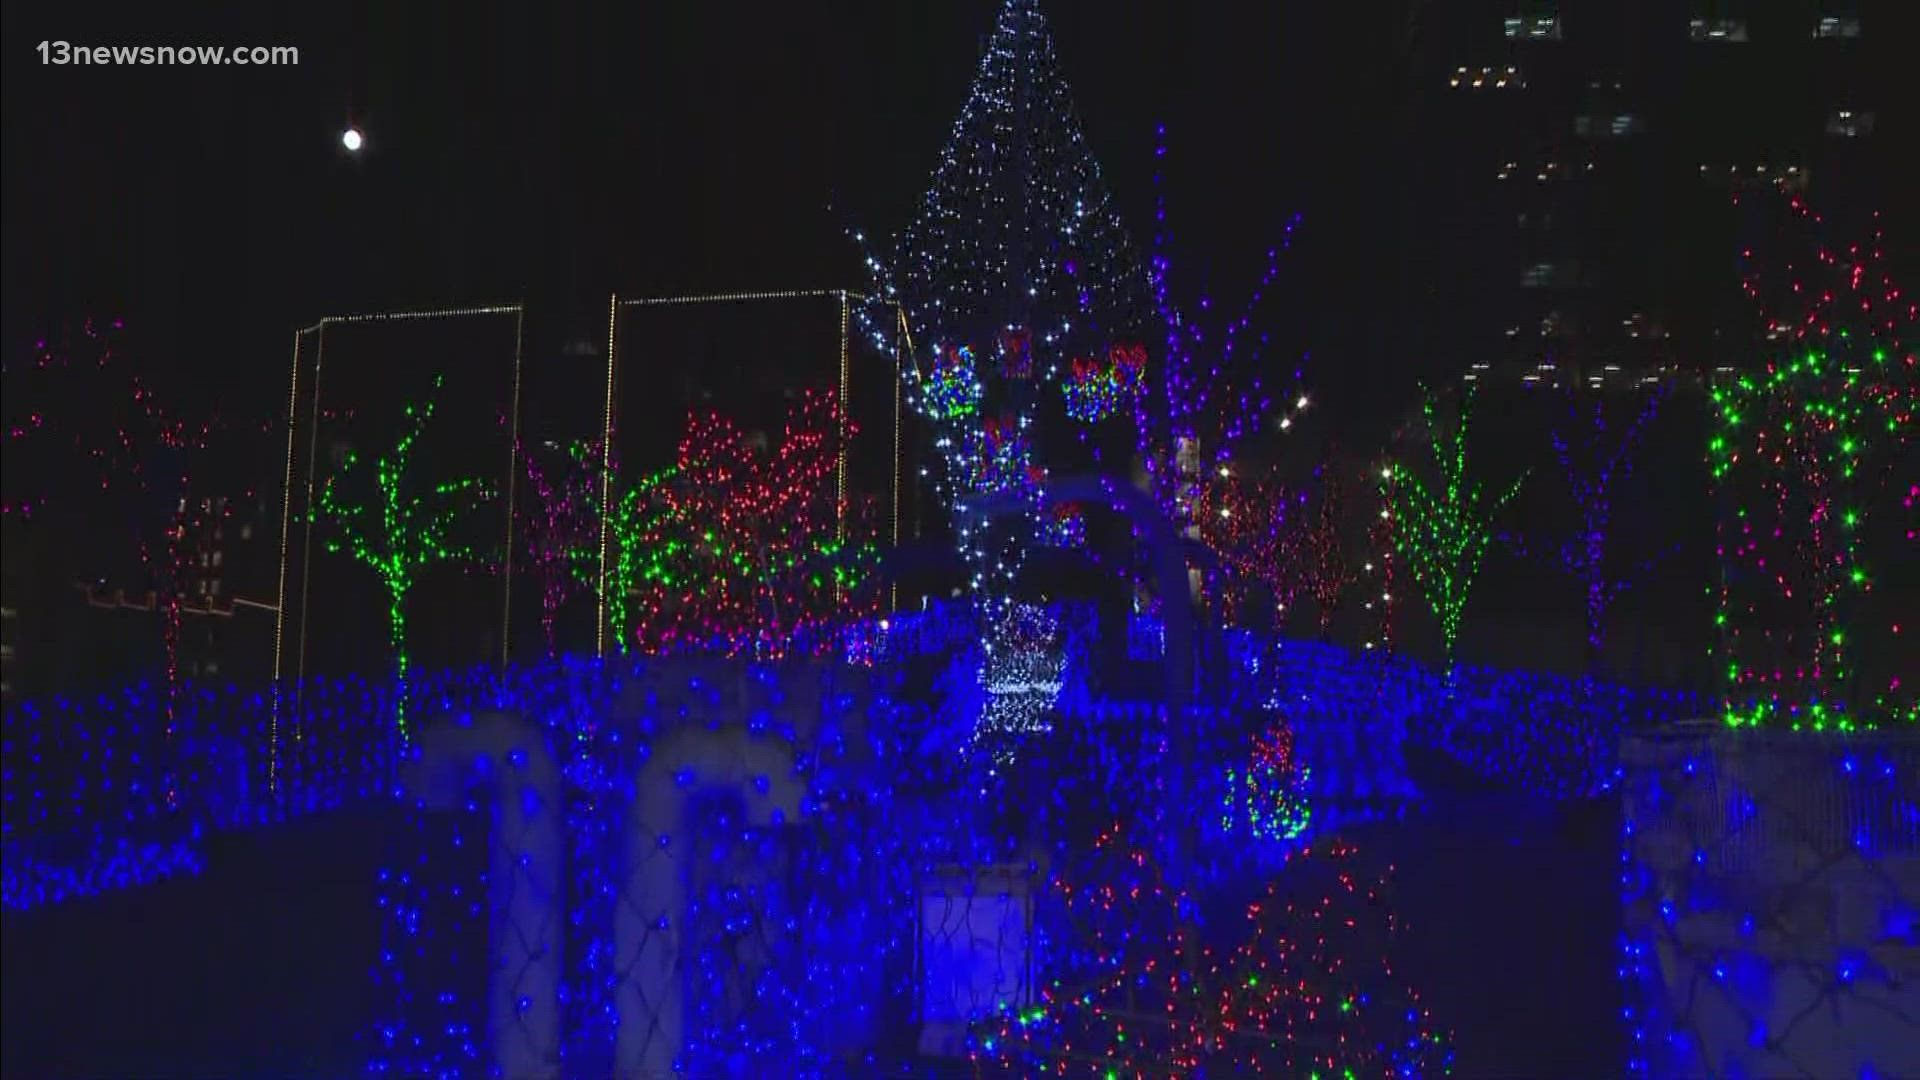 This year features 300,000 additional lights decorating the Battleship Wisconsin.